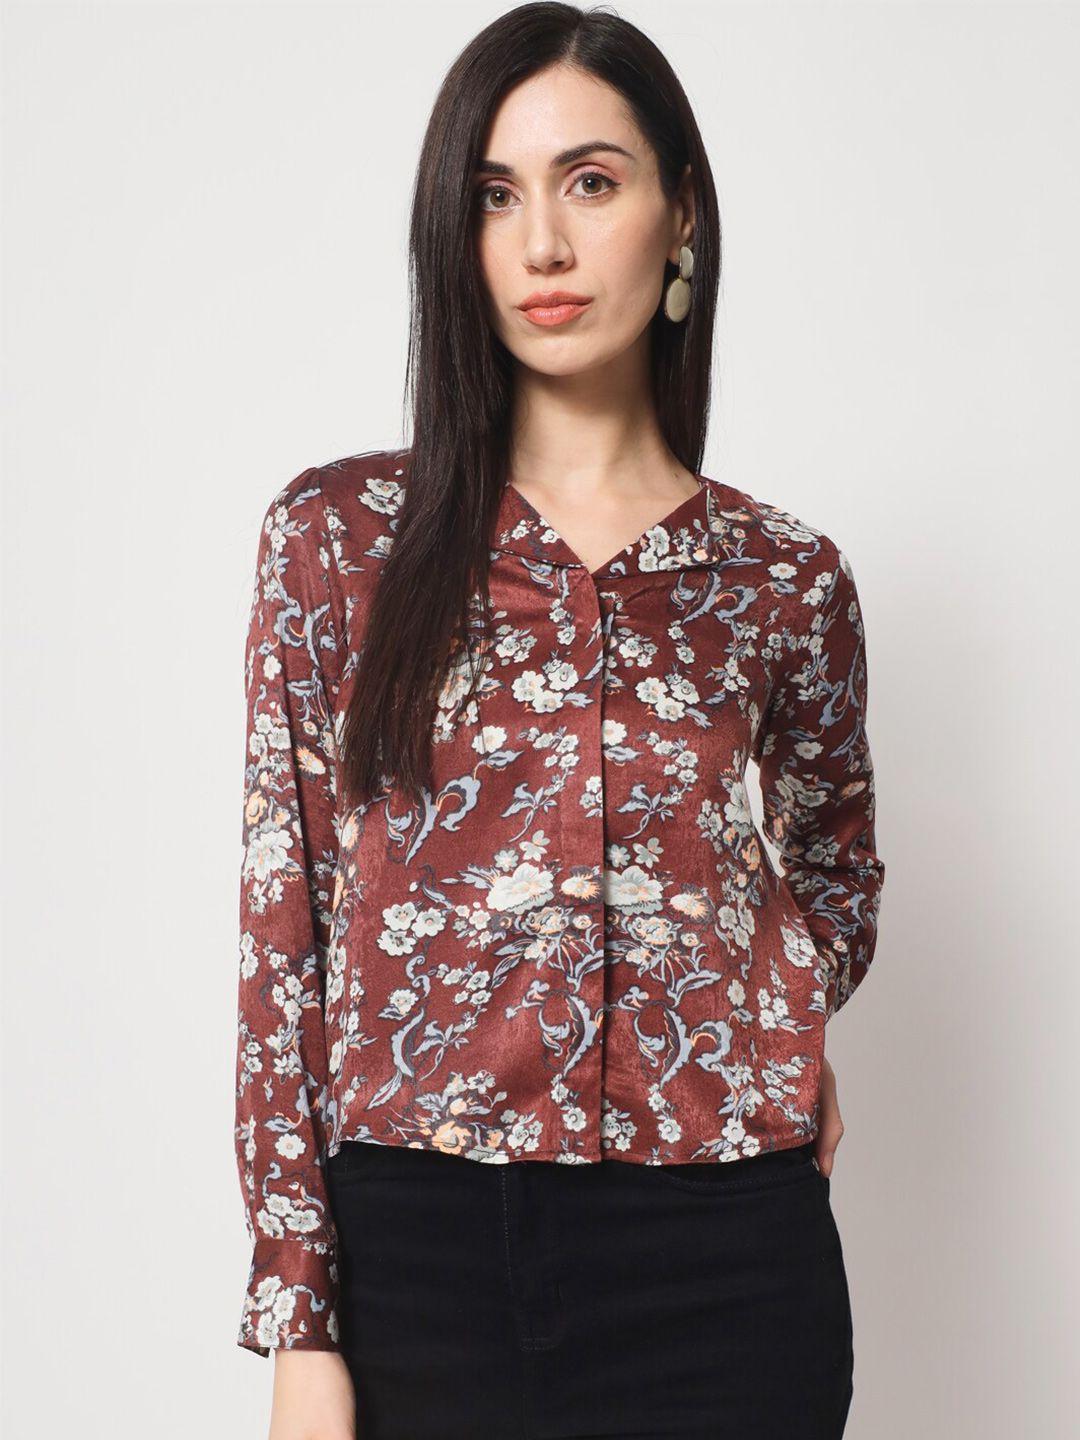 charmgal-women-classic-floral-printed-casual-shirt